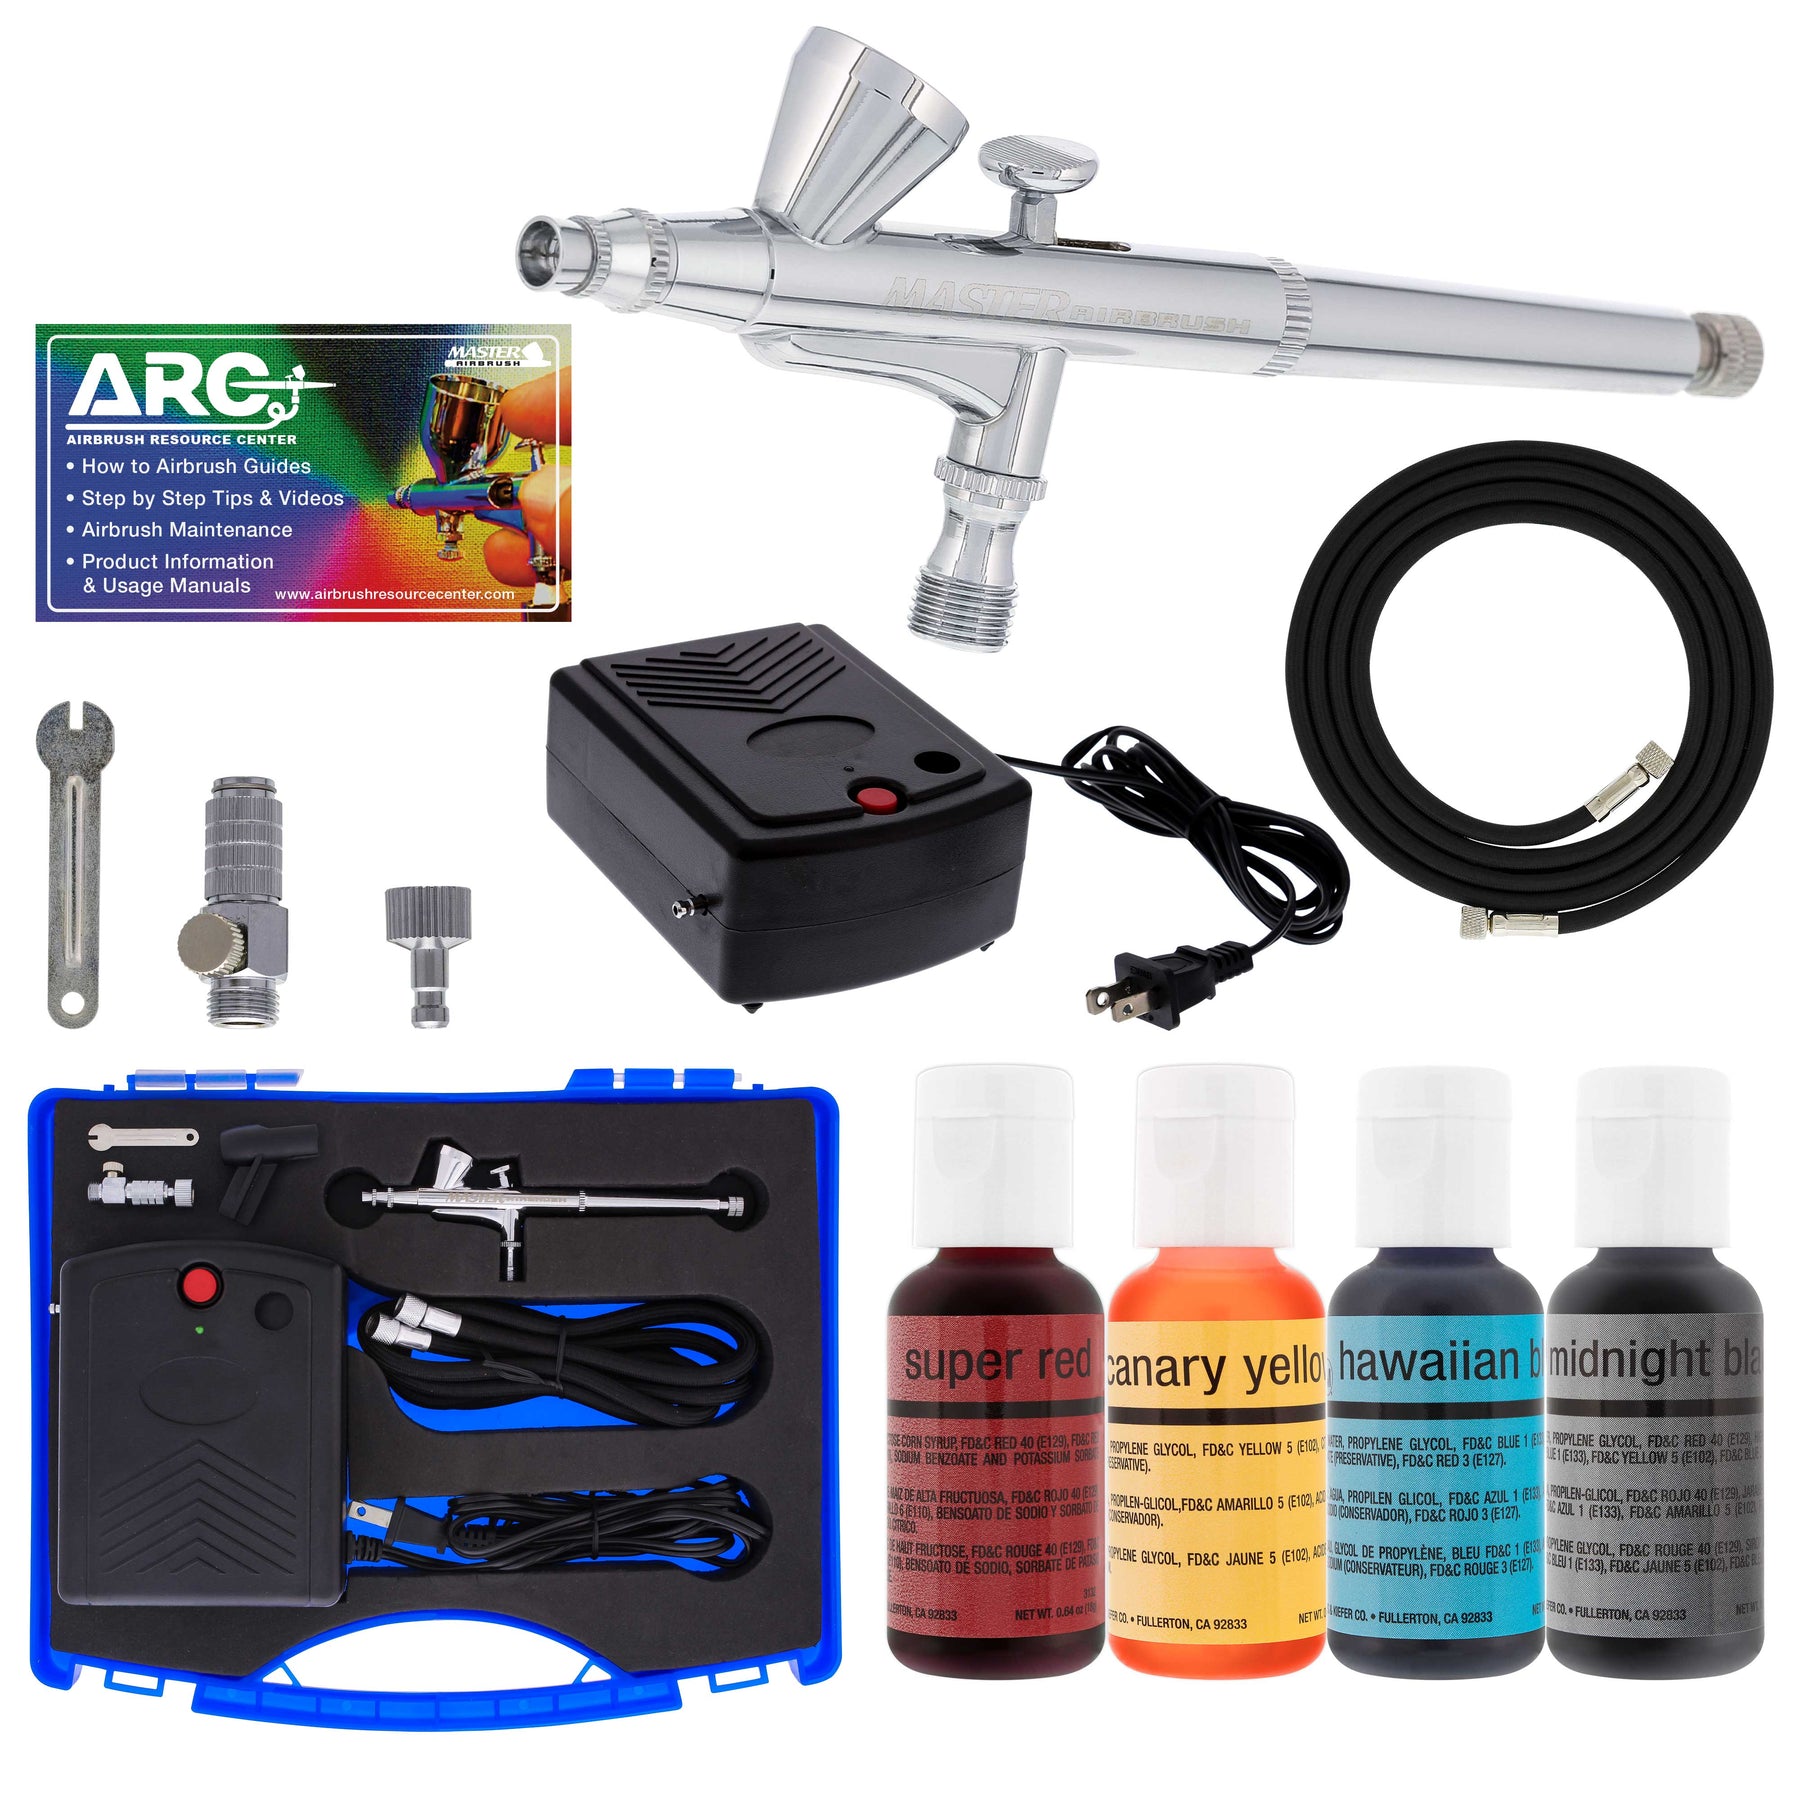 2-Airbrush Deluxe Cake Decorating Airbrush Kit with 12 .7 fl oz Chef Master  Airbrush Food Colors and Tank Compressor